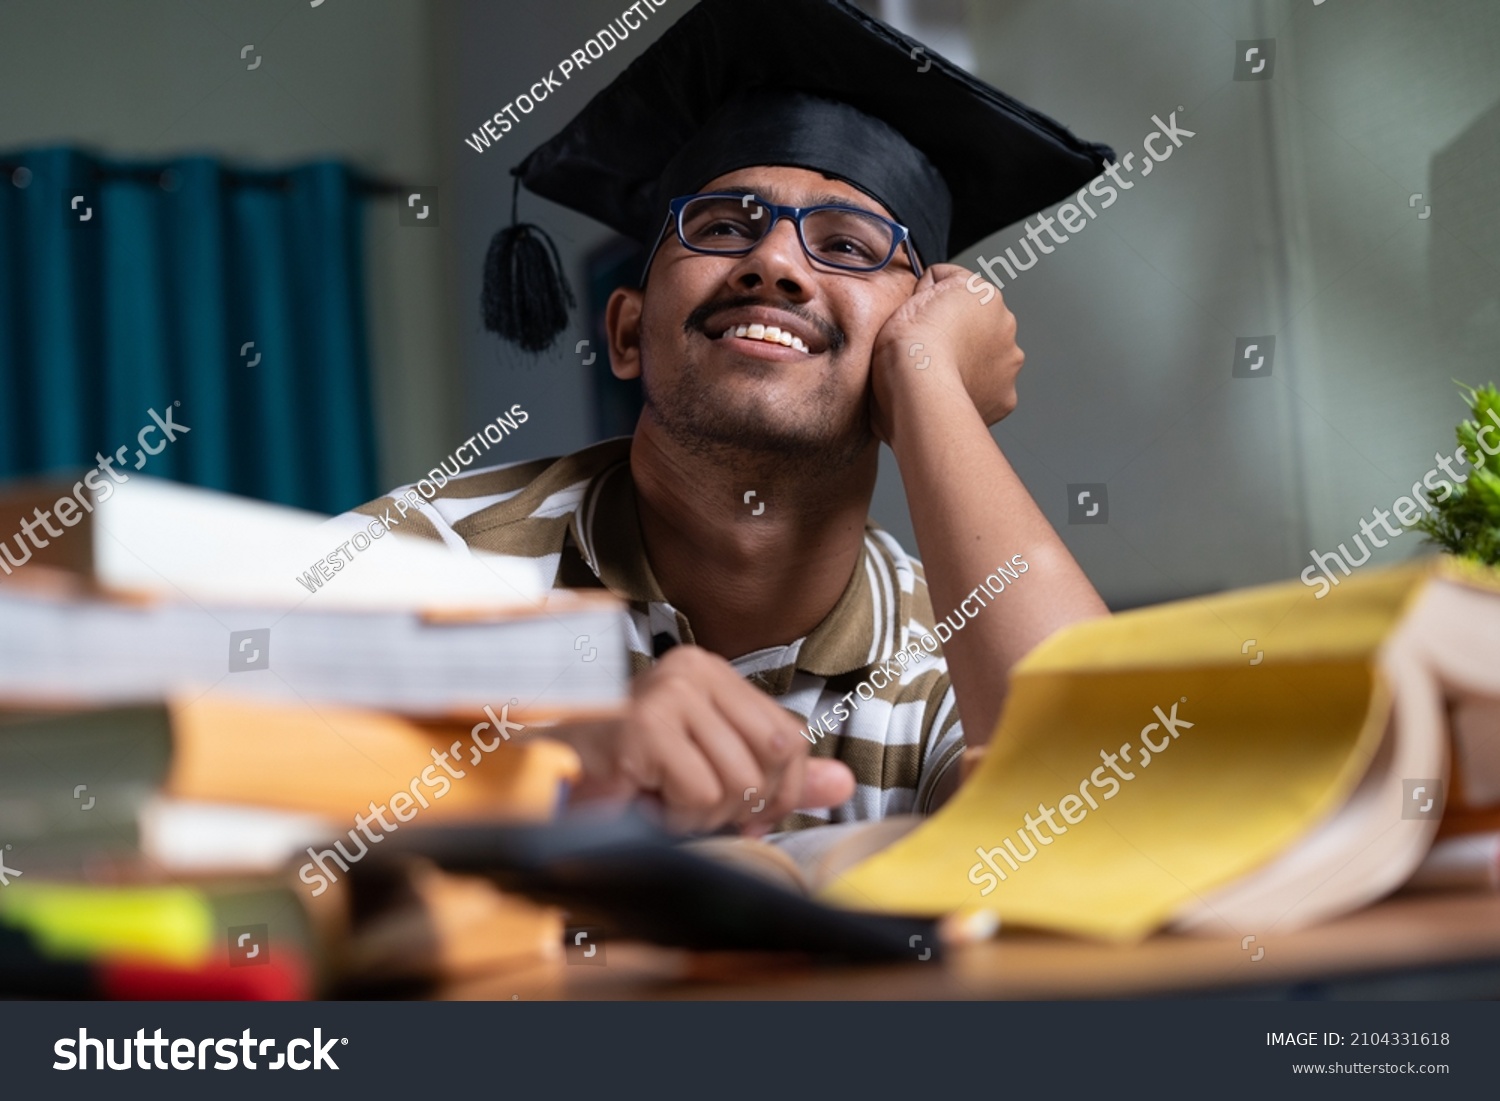 young student dreaming about graduation while studing book or preparing for examination at home - concept of daydreaming and future career goal and education. #2104331618